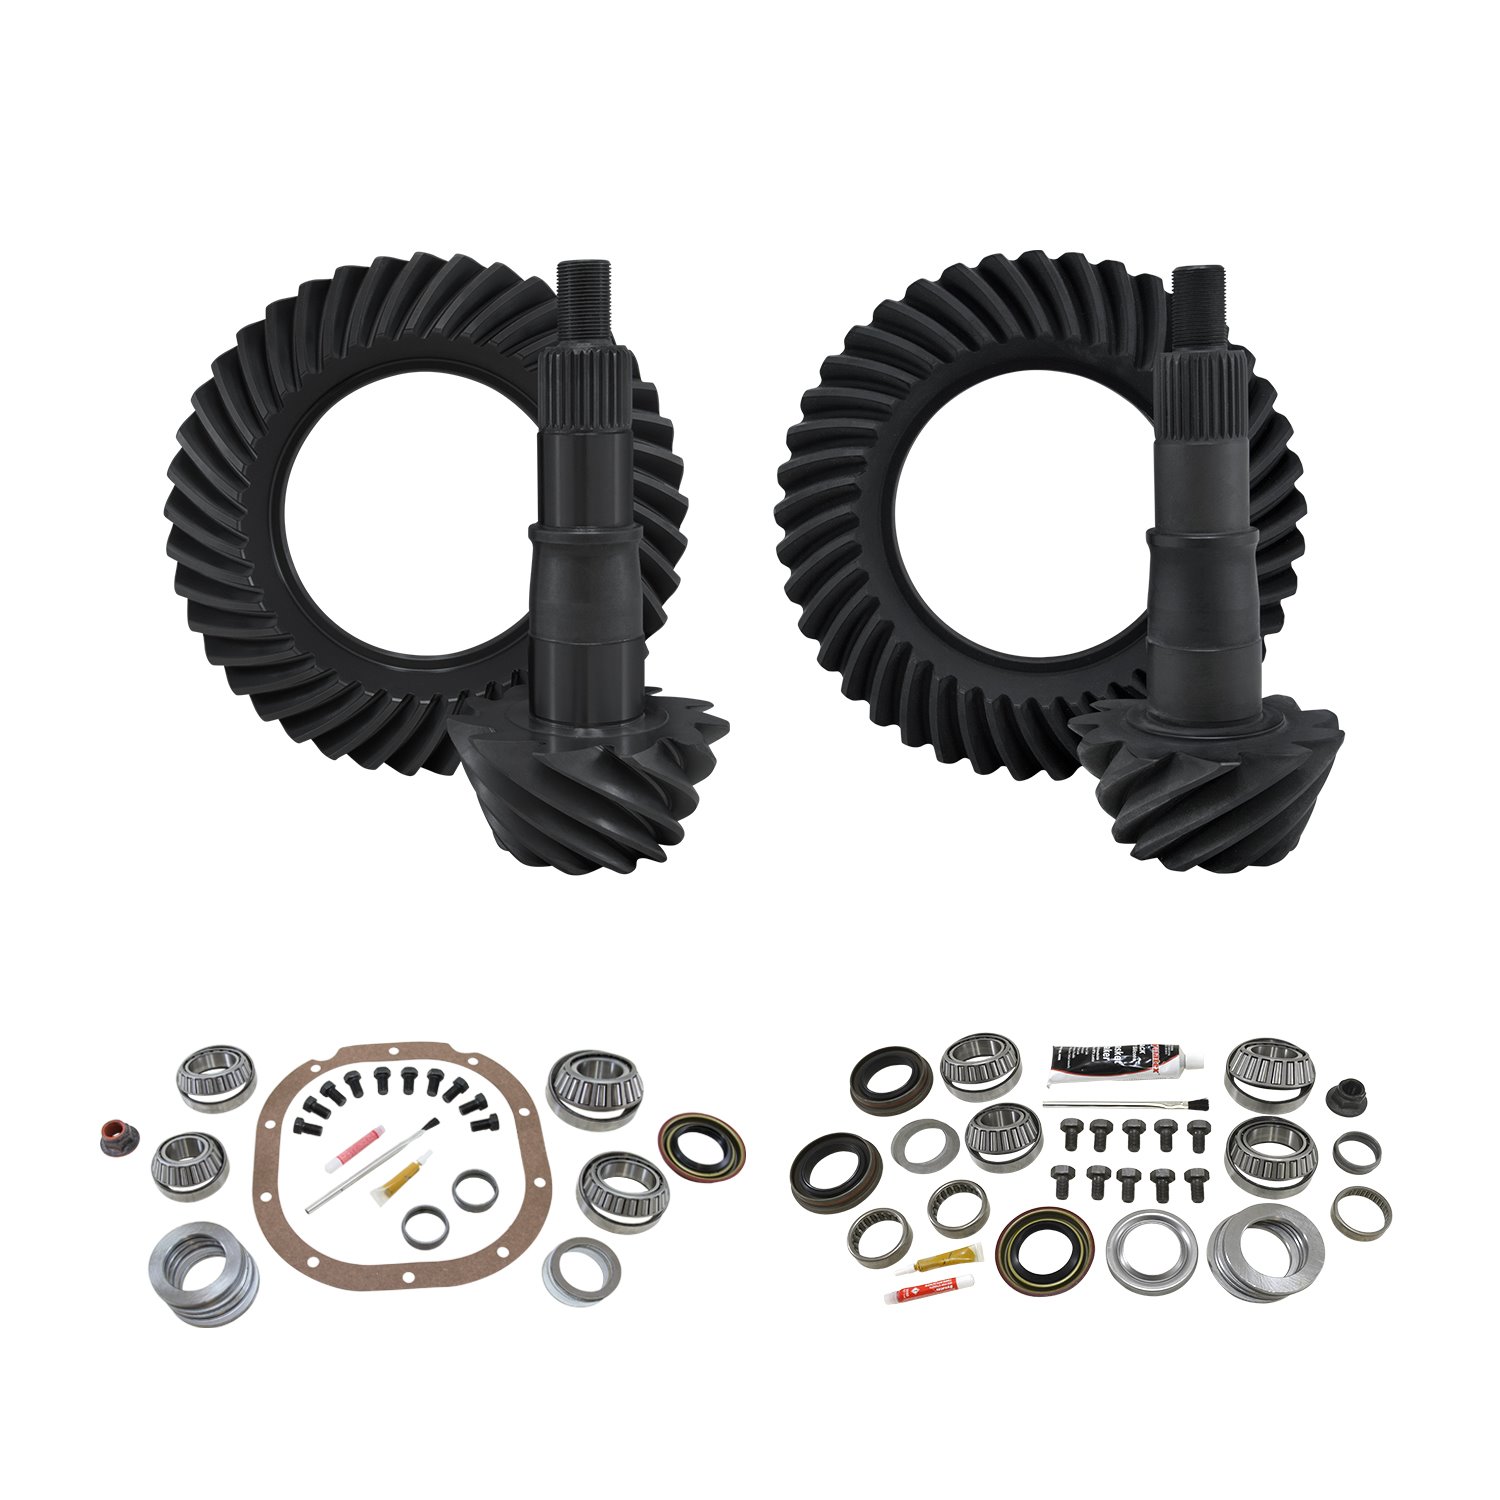 Re-Gear & Installation Kit, Ford 8.8 in., Various F150, 4.11 Ratio, Fr&Rr